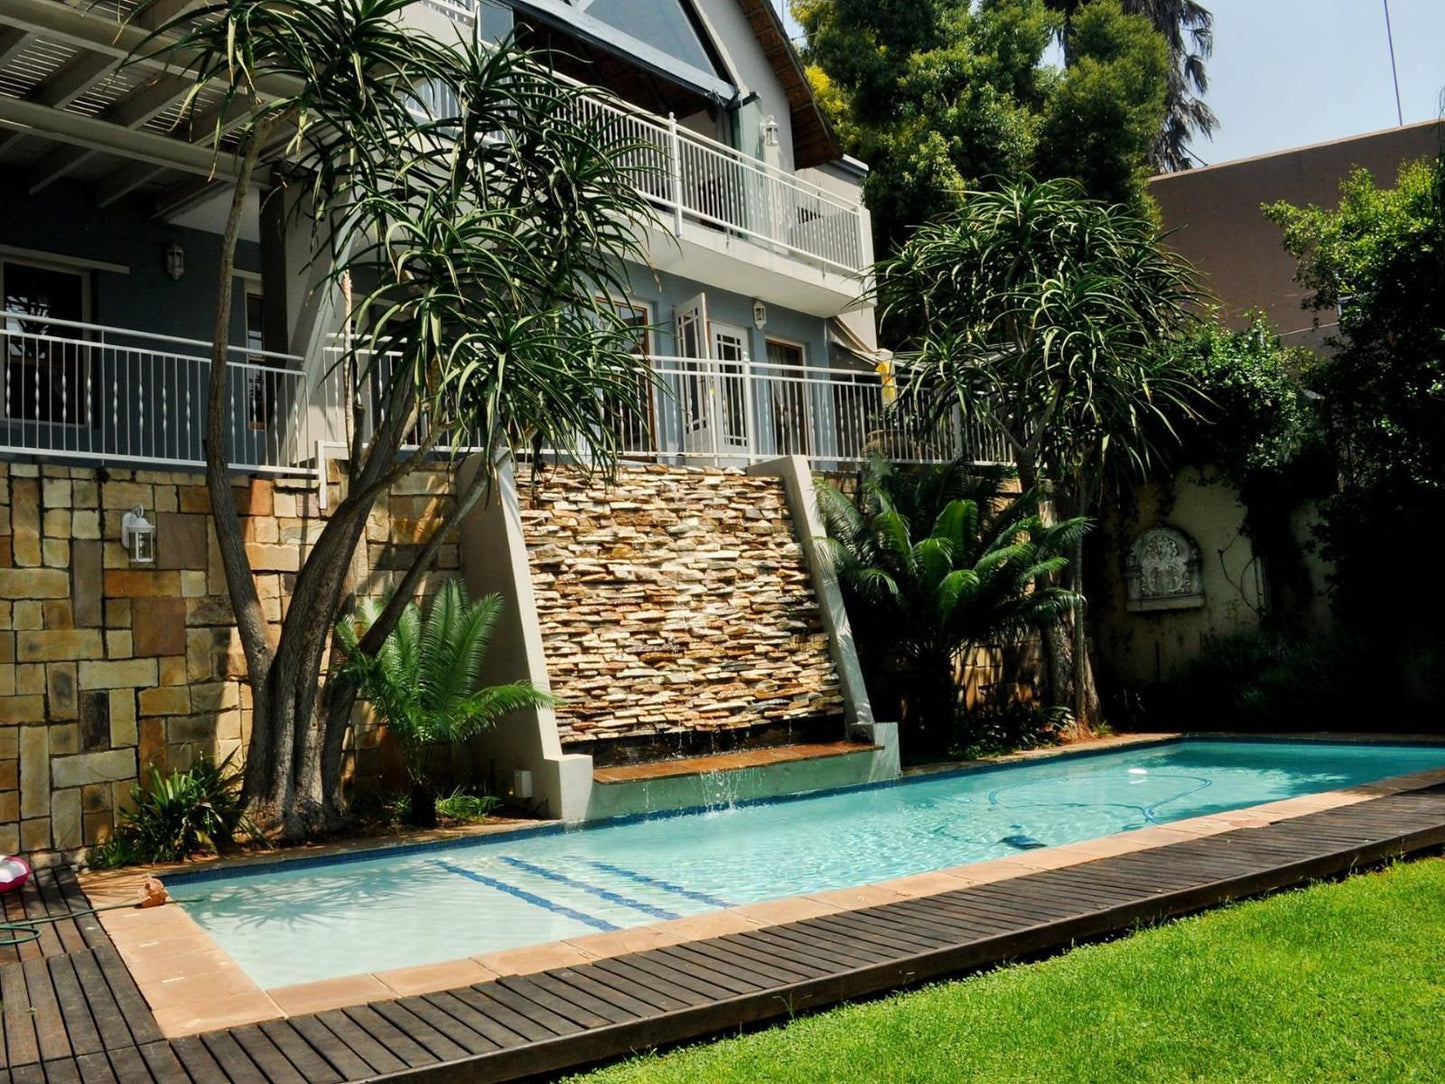 Fever Tree Manor Kosmos Hartbeespoort North West Province South Africa House, Building, Architecture, Palm Tree, Plant, Nature, Wood, Garden, Swimming Pool